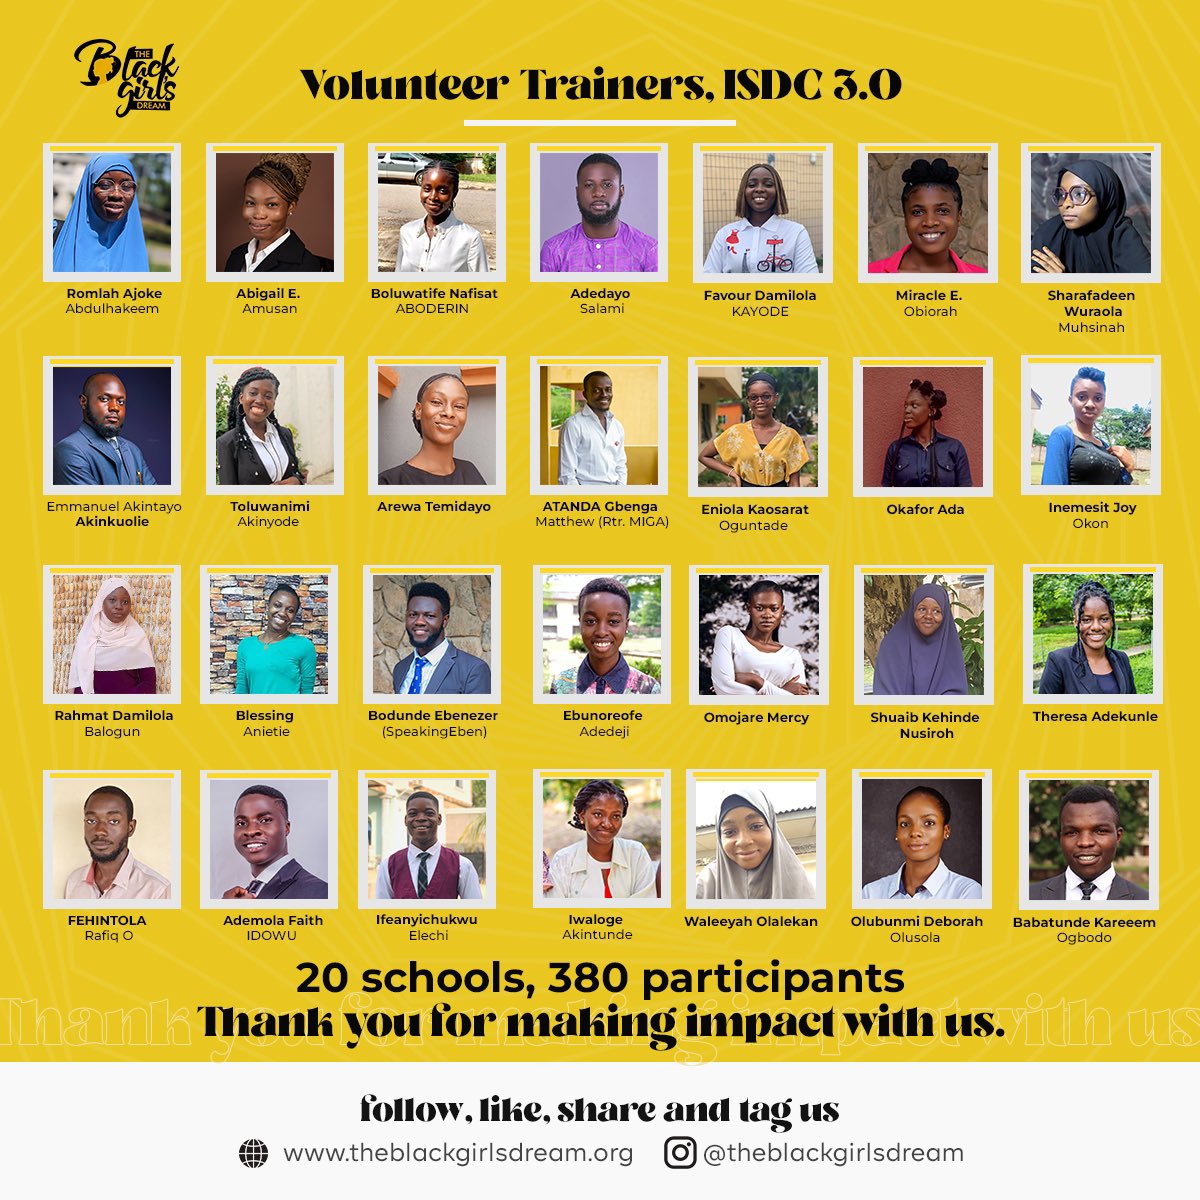 Dear Volunteer Trainers, thank you for
making impact with us! You rock💛. 

#ISDC 3.0
#theinclusiveedition
#PublicSpeakingtraining
#PublicSpeaking
#PublicSpeakers
#Competition
#VolunteerTrainers